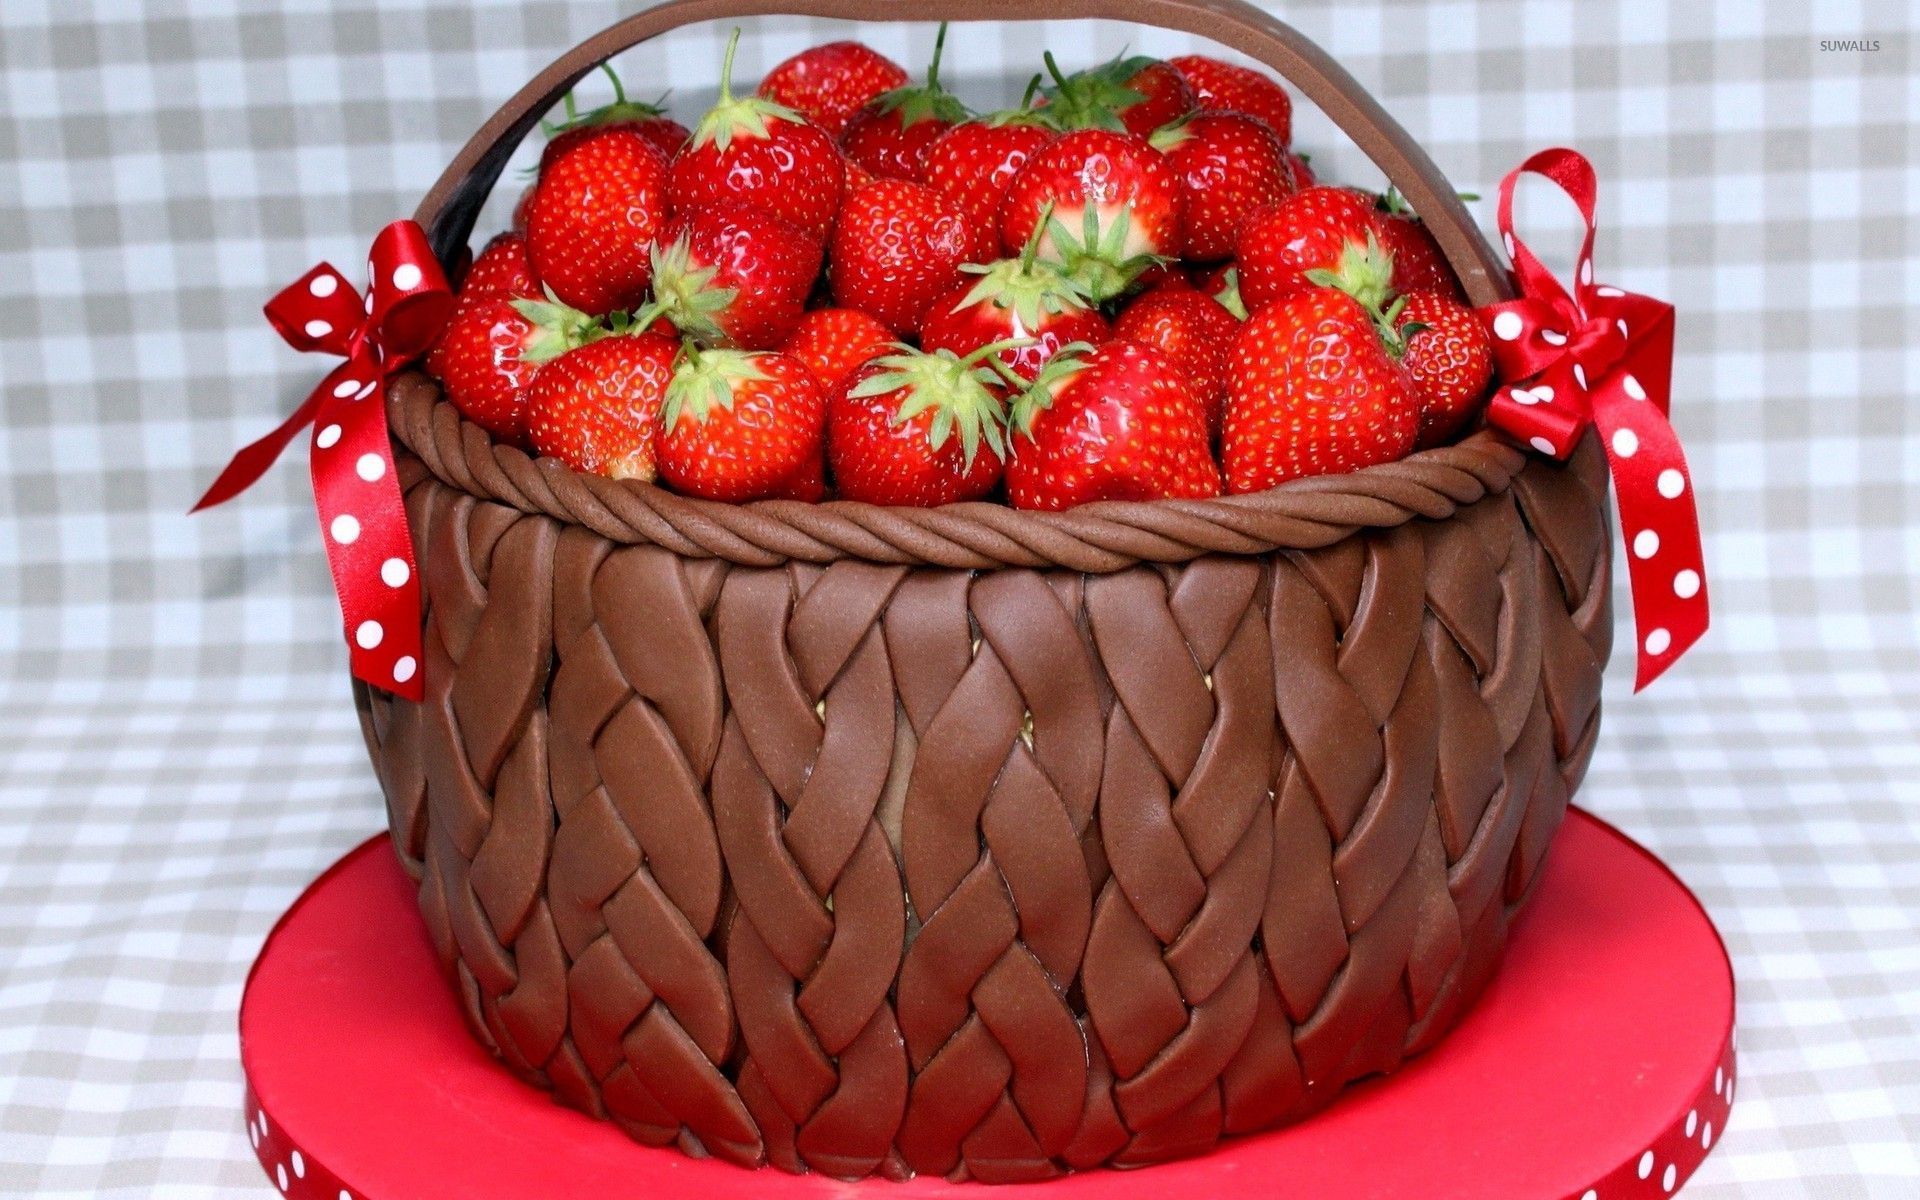 Strawberries in a chocolate basket wallpaper - Photography wallpapers -  #33533